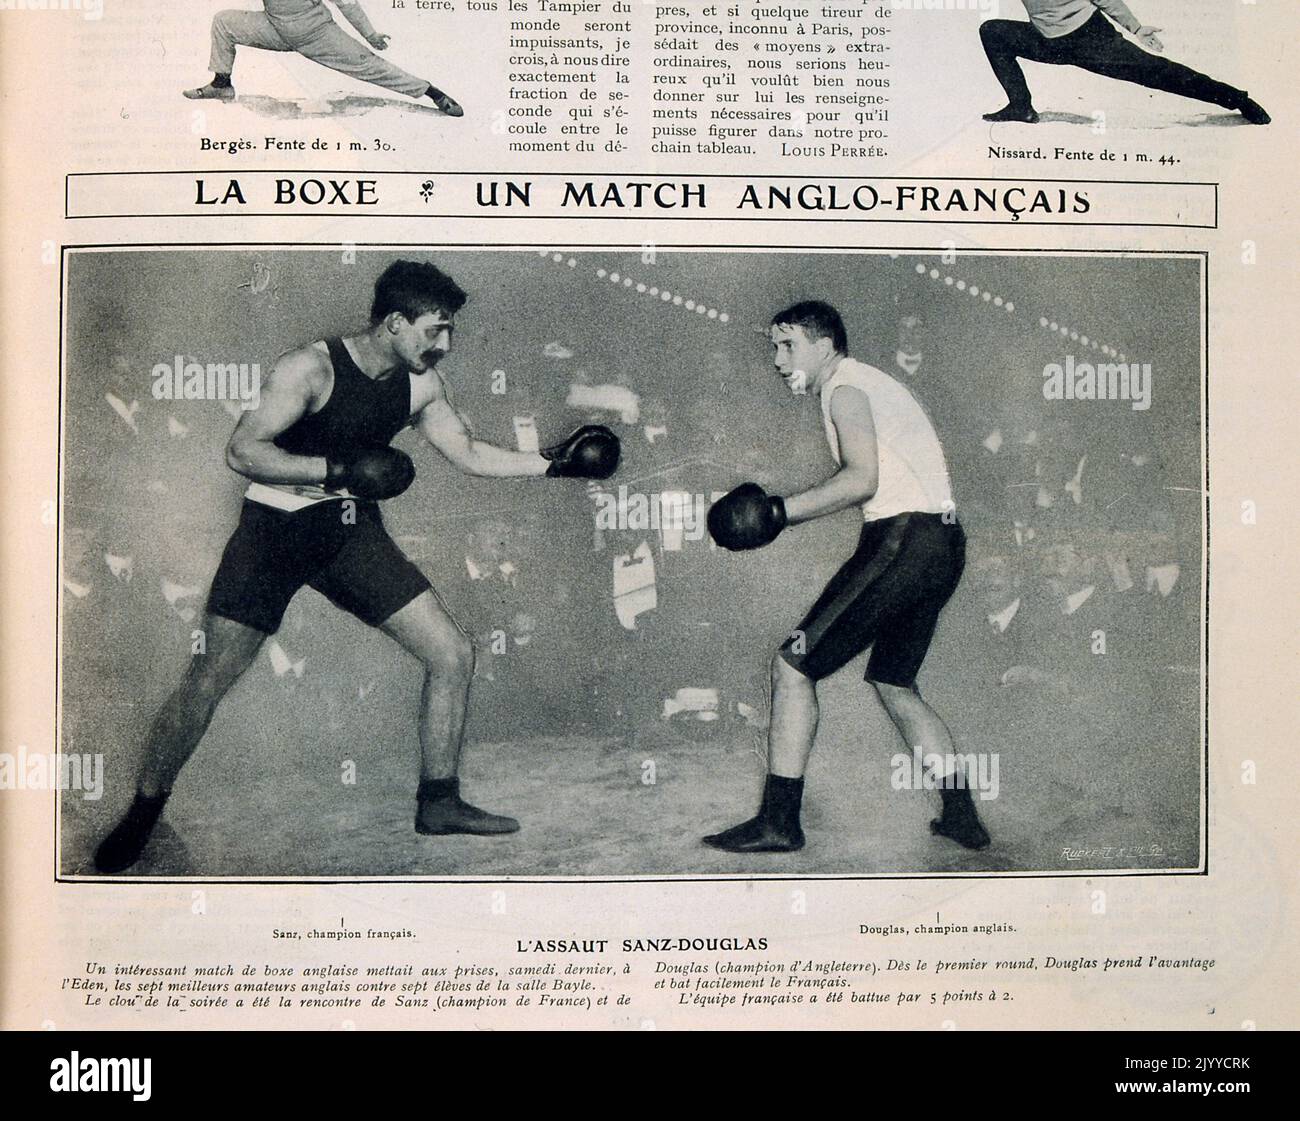 Photograph inside of the lifestyle magazine La Vie au Grand Air; Boxing match between and English man and a French man in an Anglo-French boxing championships in which the English win by five points. Stock Photo